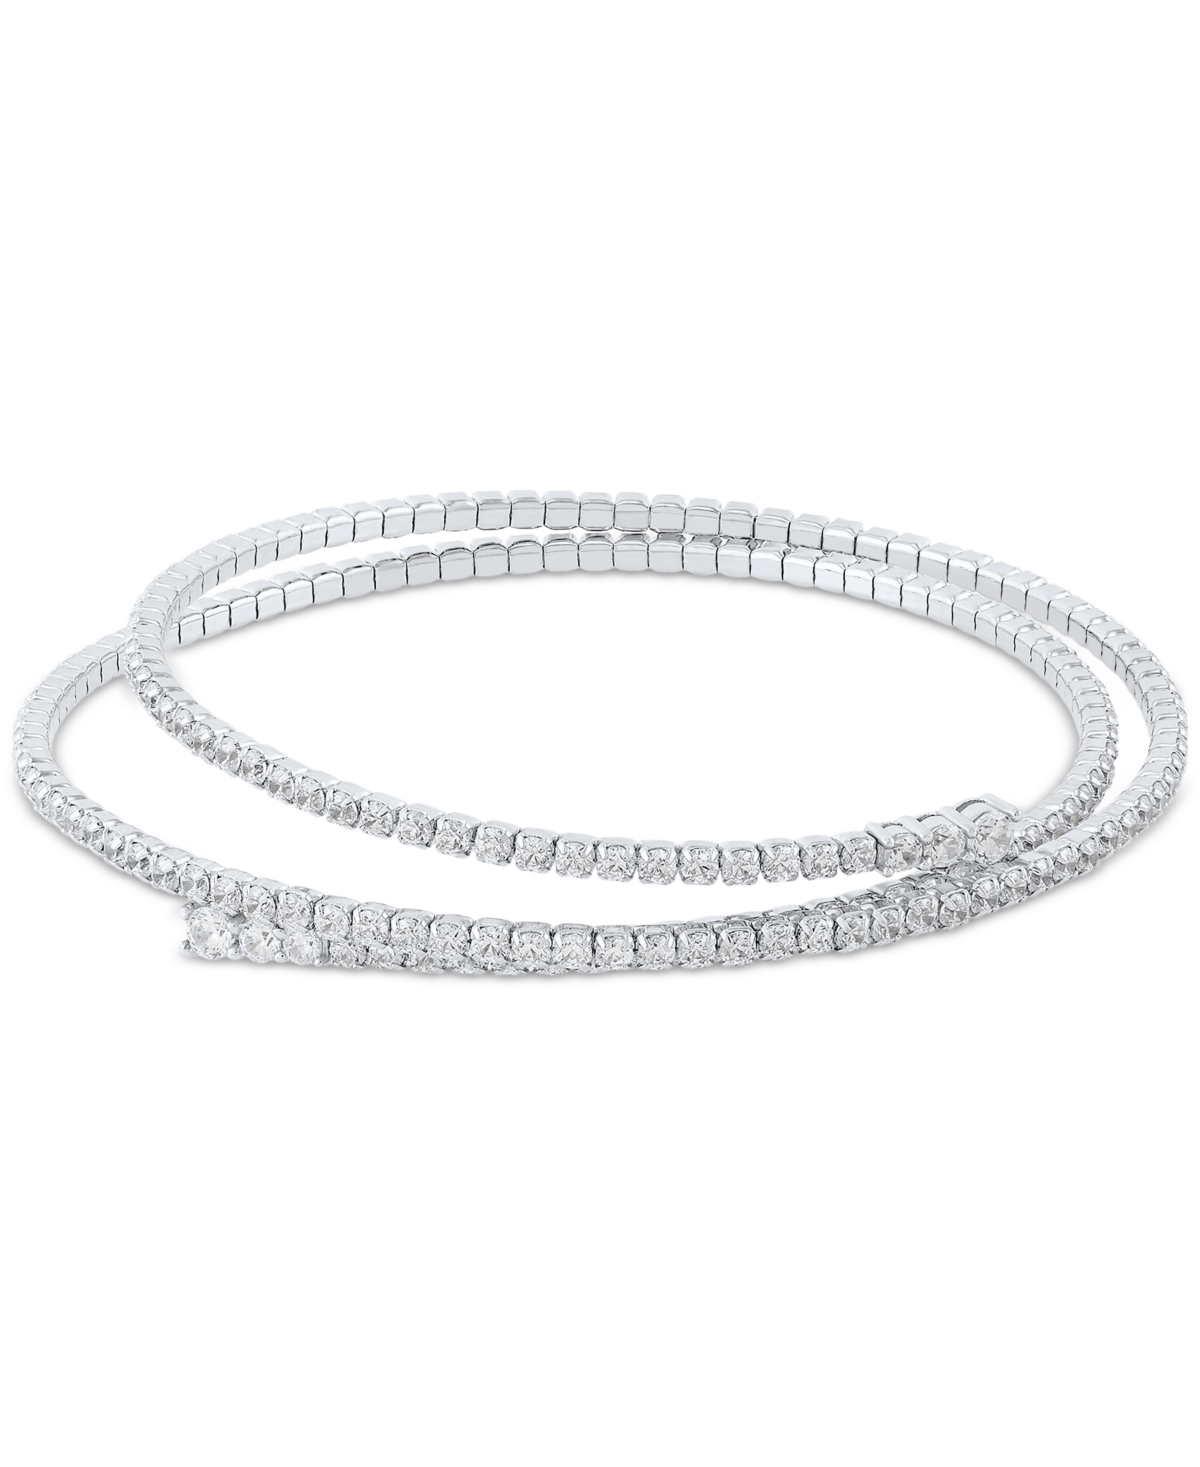 Cubic Zirconia Wrap Collar Necklace in Sterling Silver - Sterling Silver